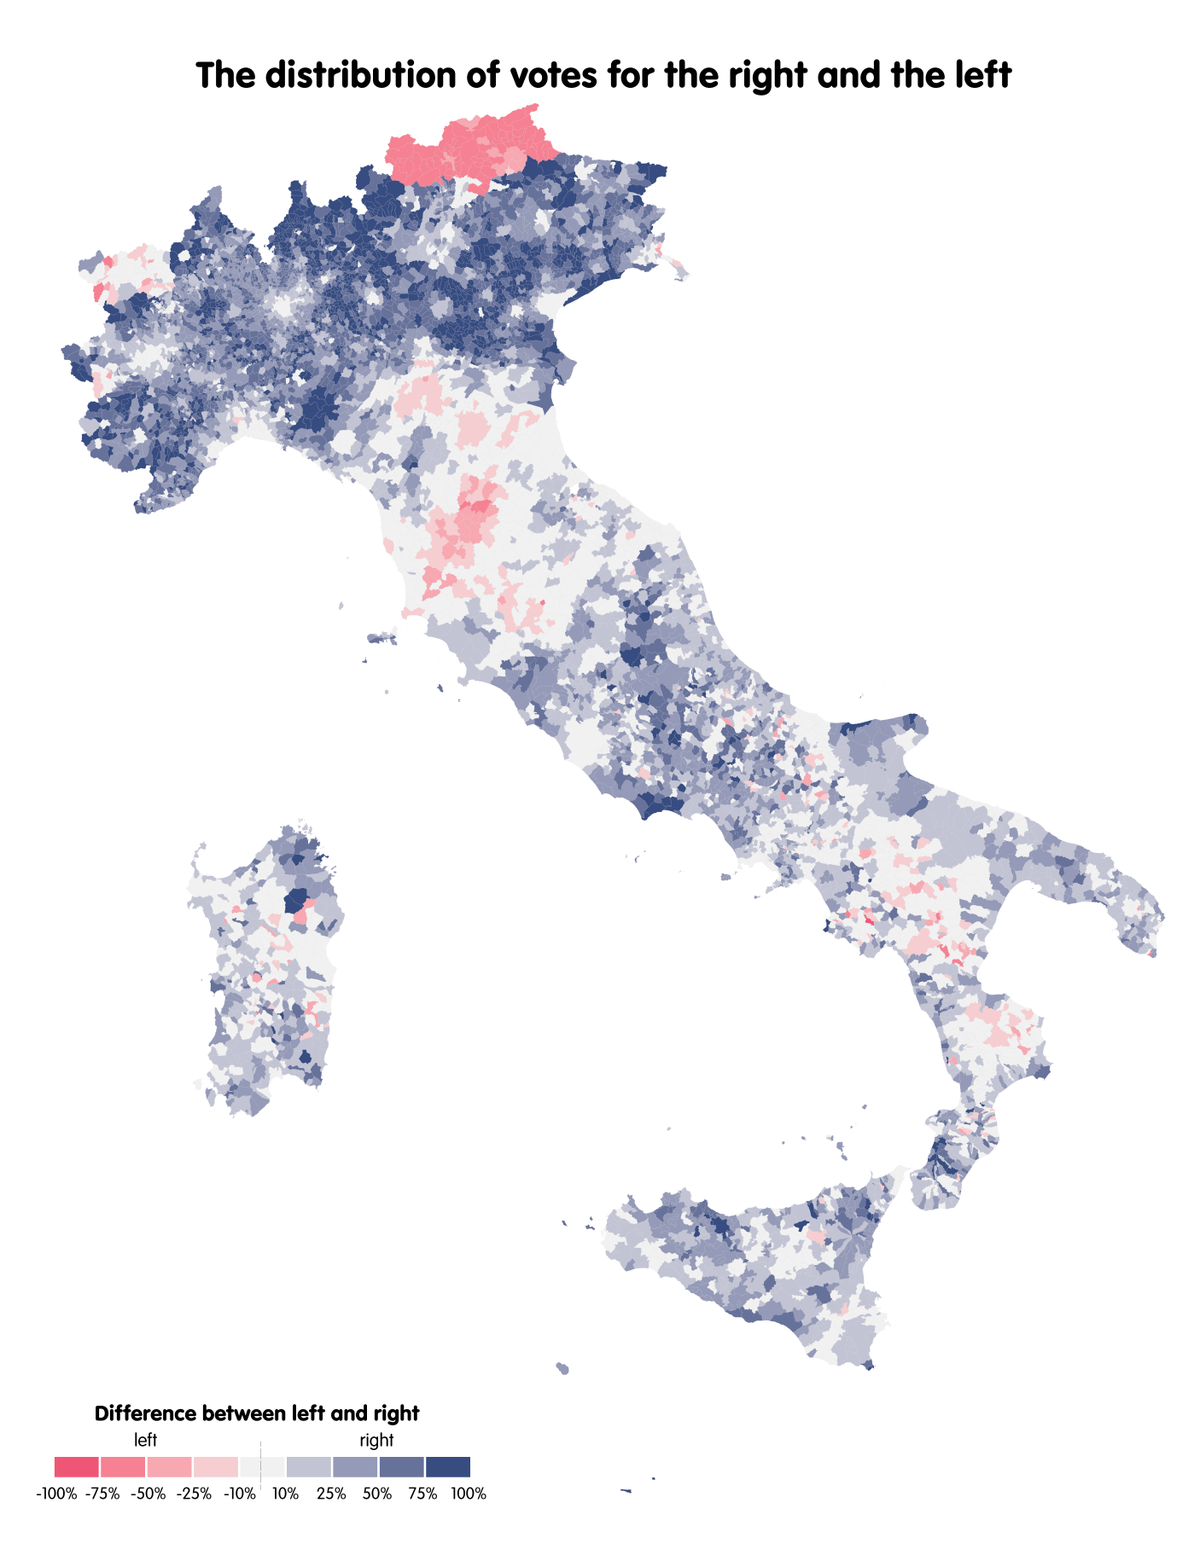 Italy - The distribution of votes for the right and the left